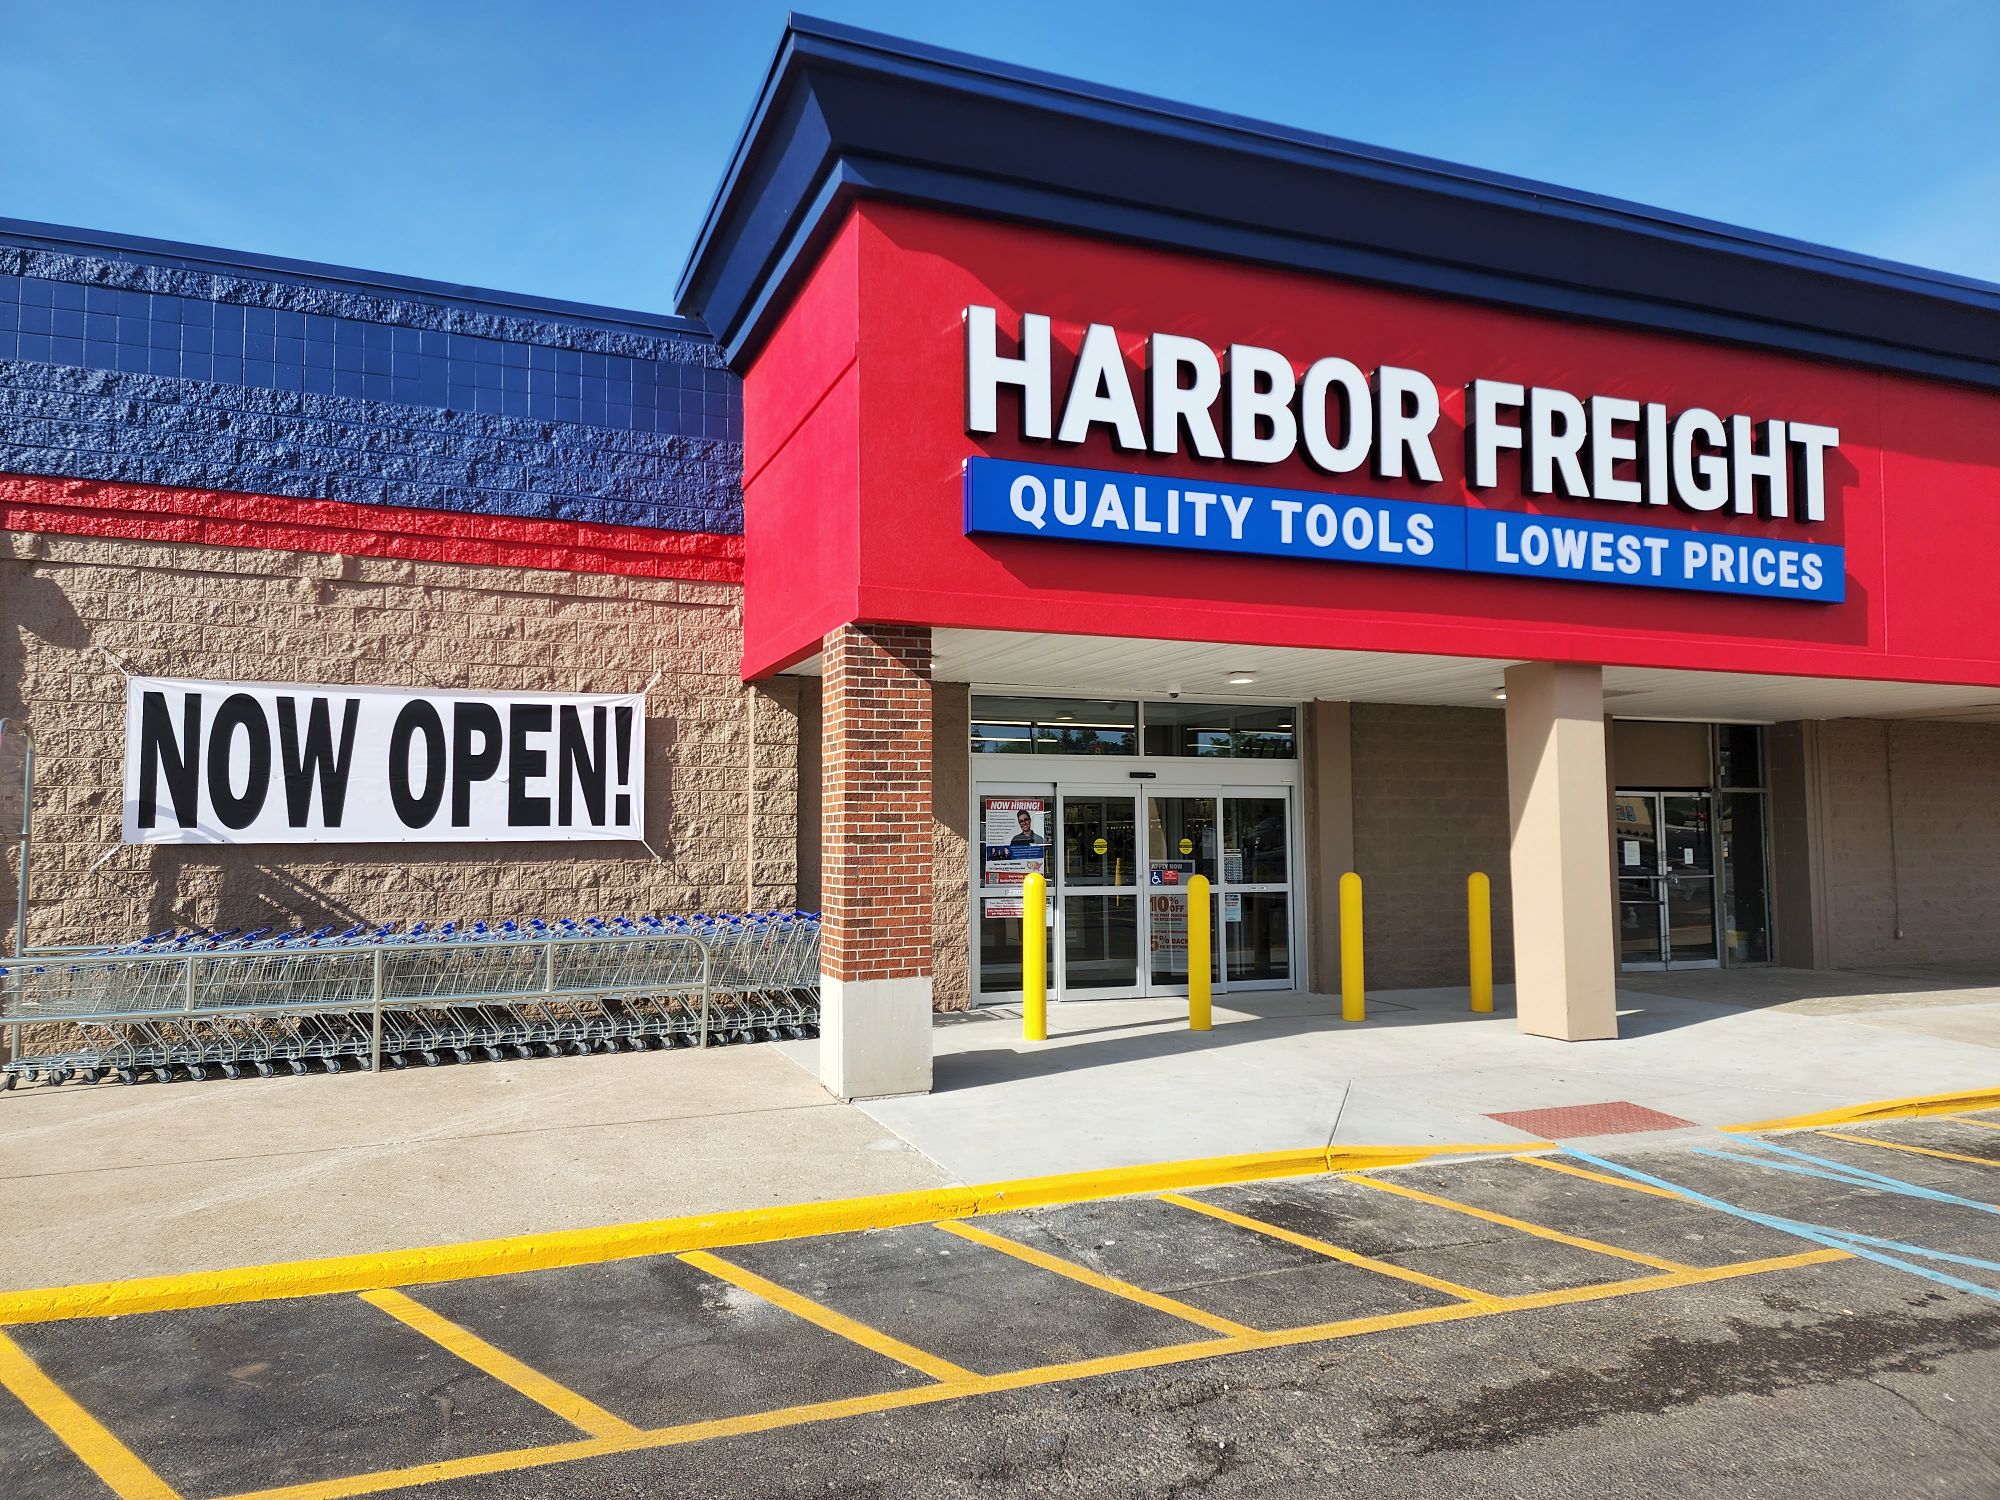 Topside Creeper Harbor Freight